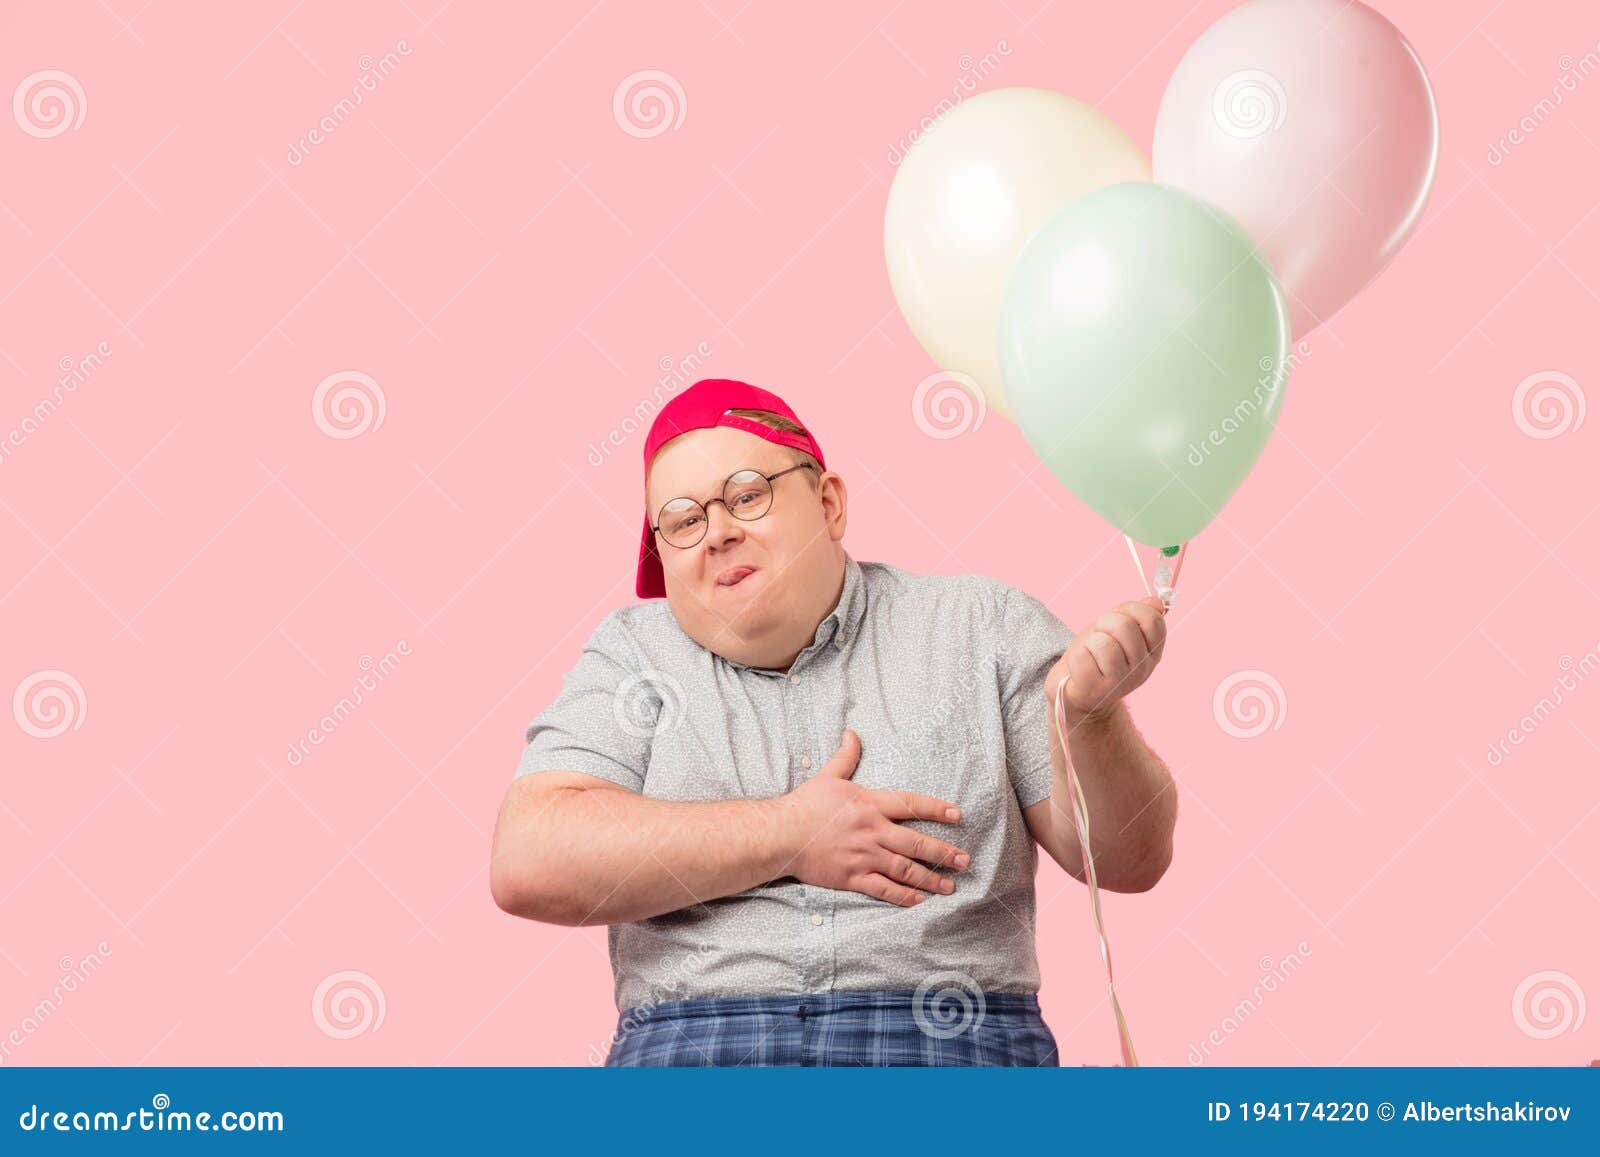 funny tubby guy with positive emotions smiling happily, holding air balloons.